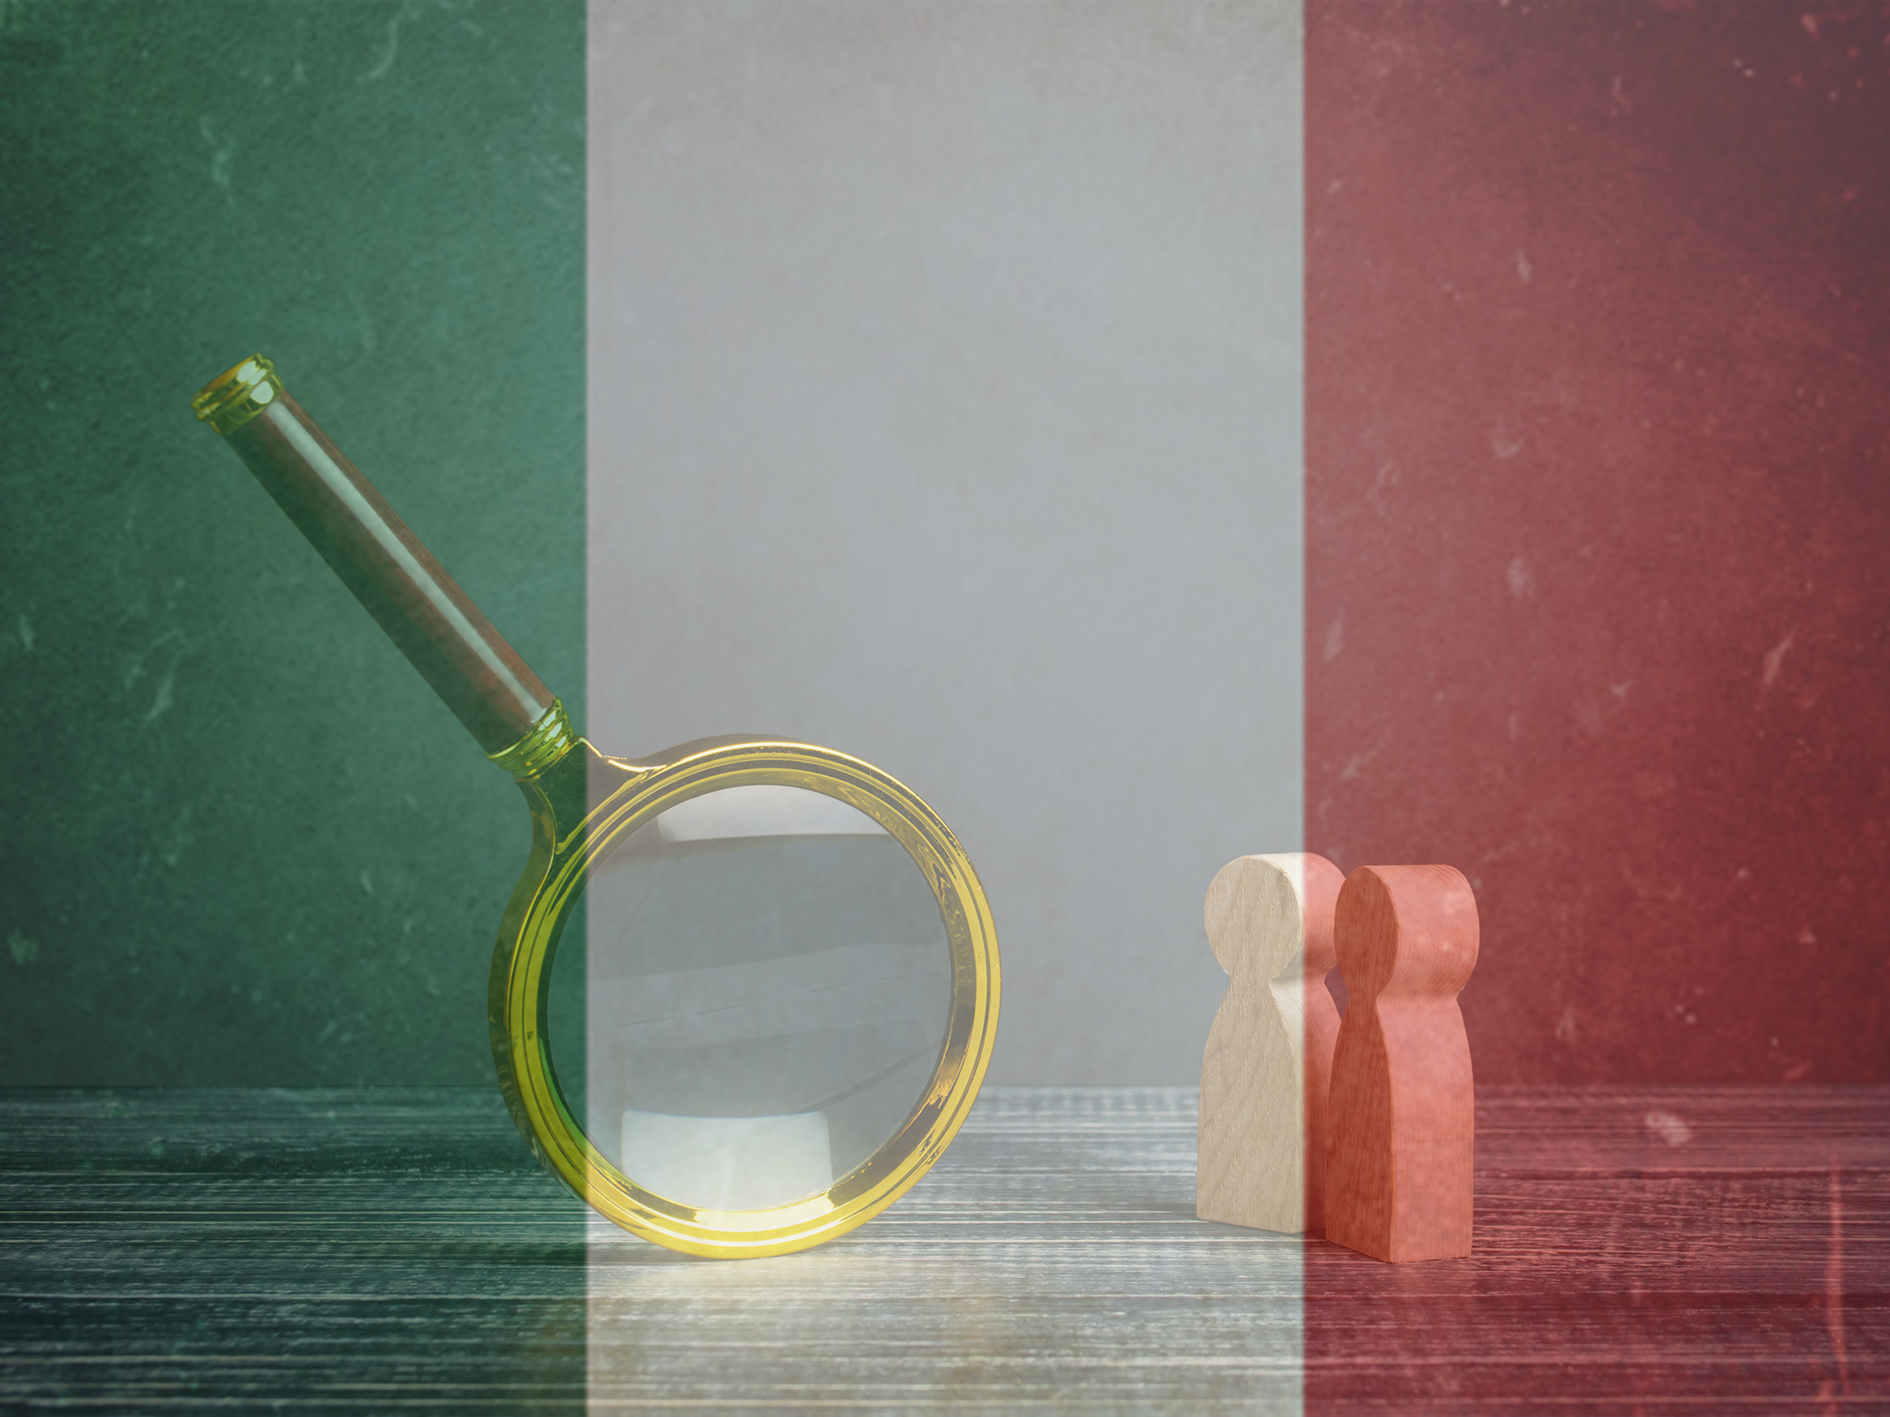 Italy: Improving protections for freedom of expression and information - Protection